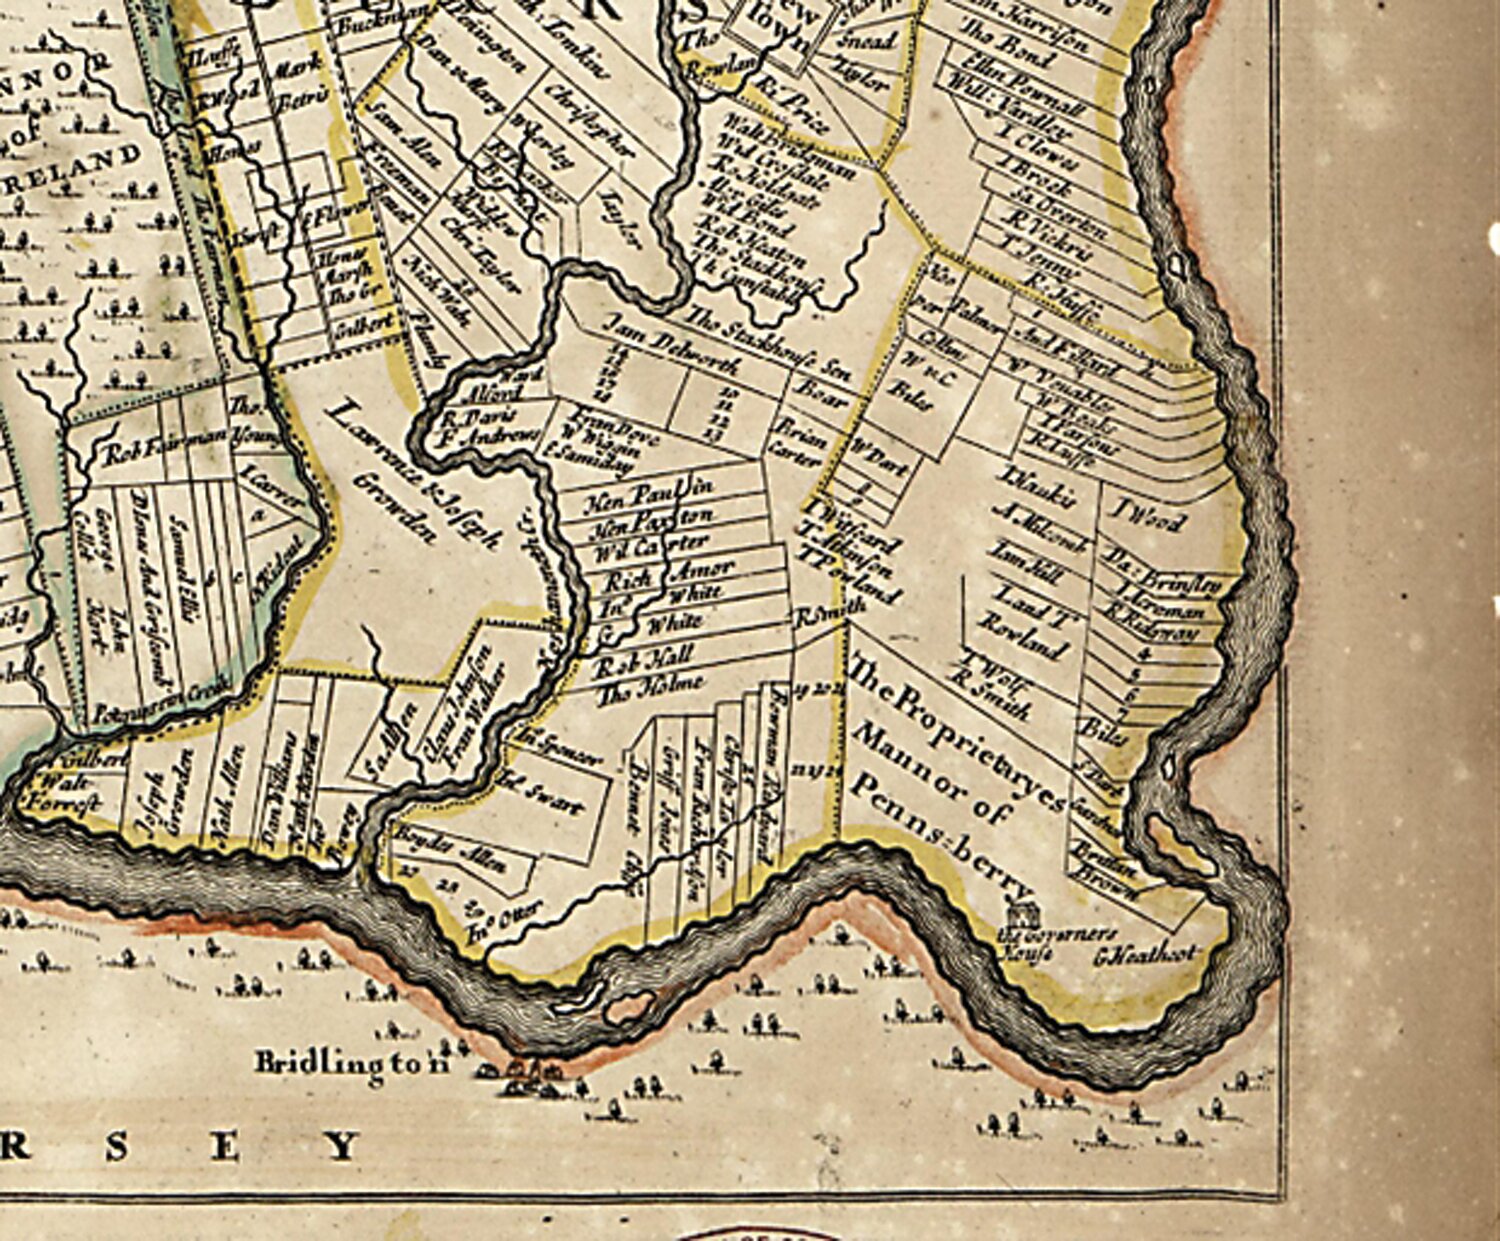 Thomas Holme’s 1687 map of the province of Pennsylvania includes, by  name, the property owners and the approximate location of their land.